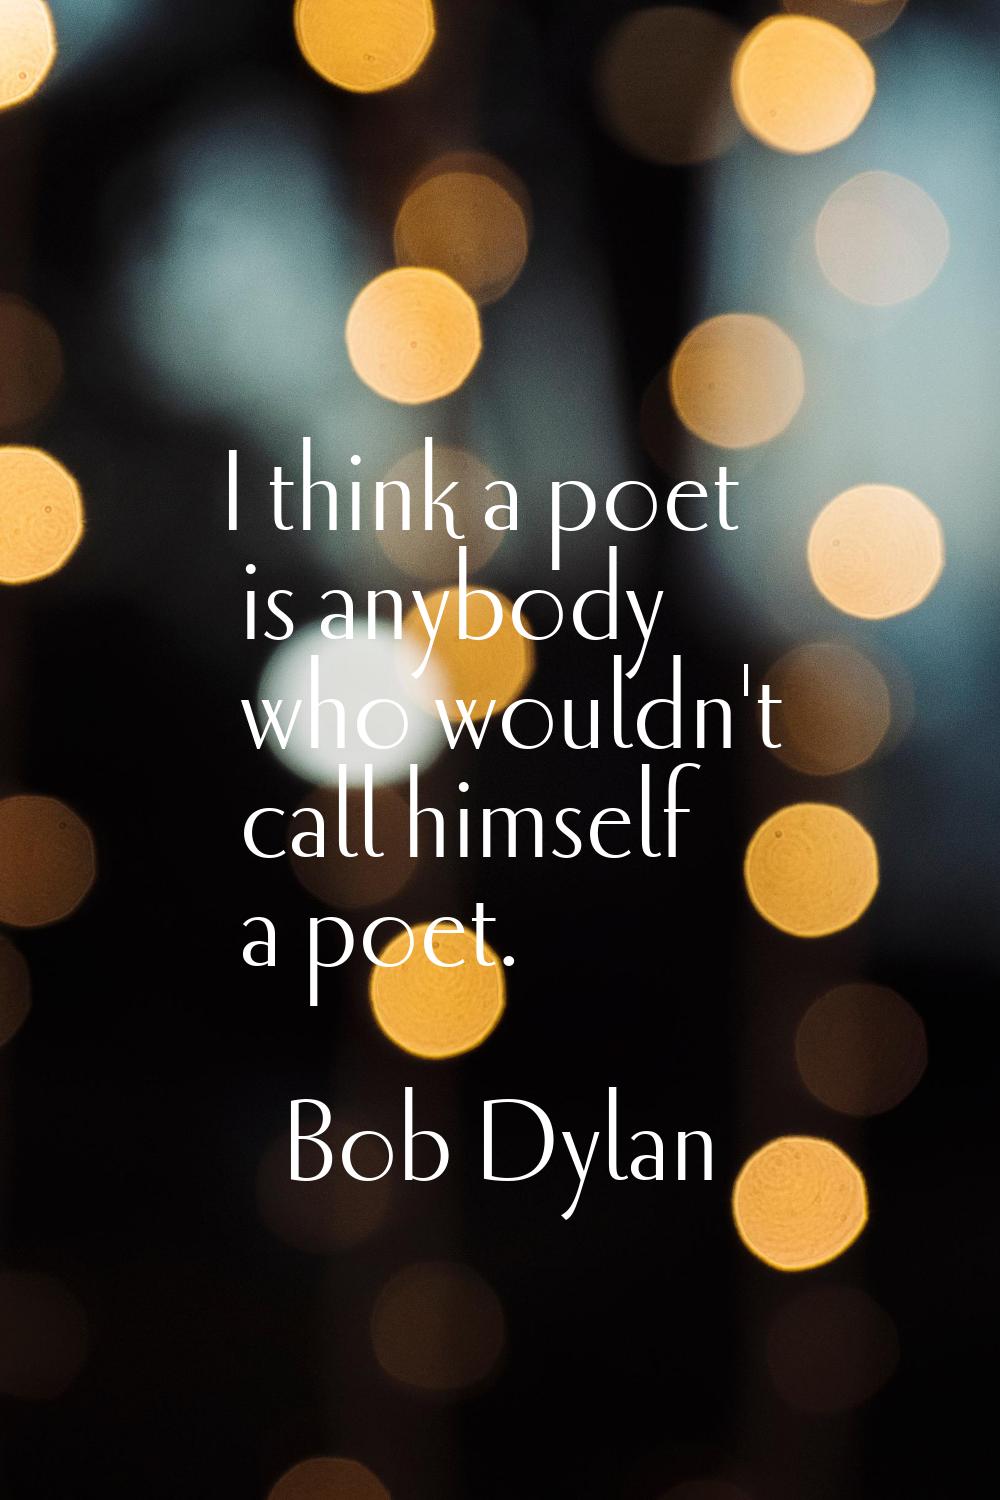 I think a poet is anybody who wouldn't call himself a poet.